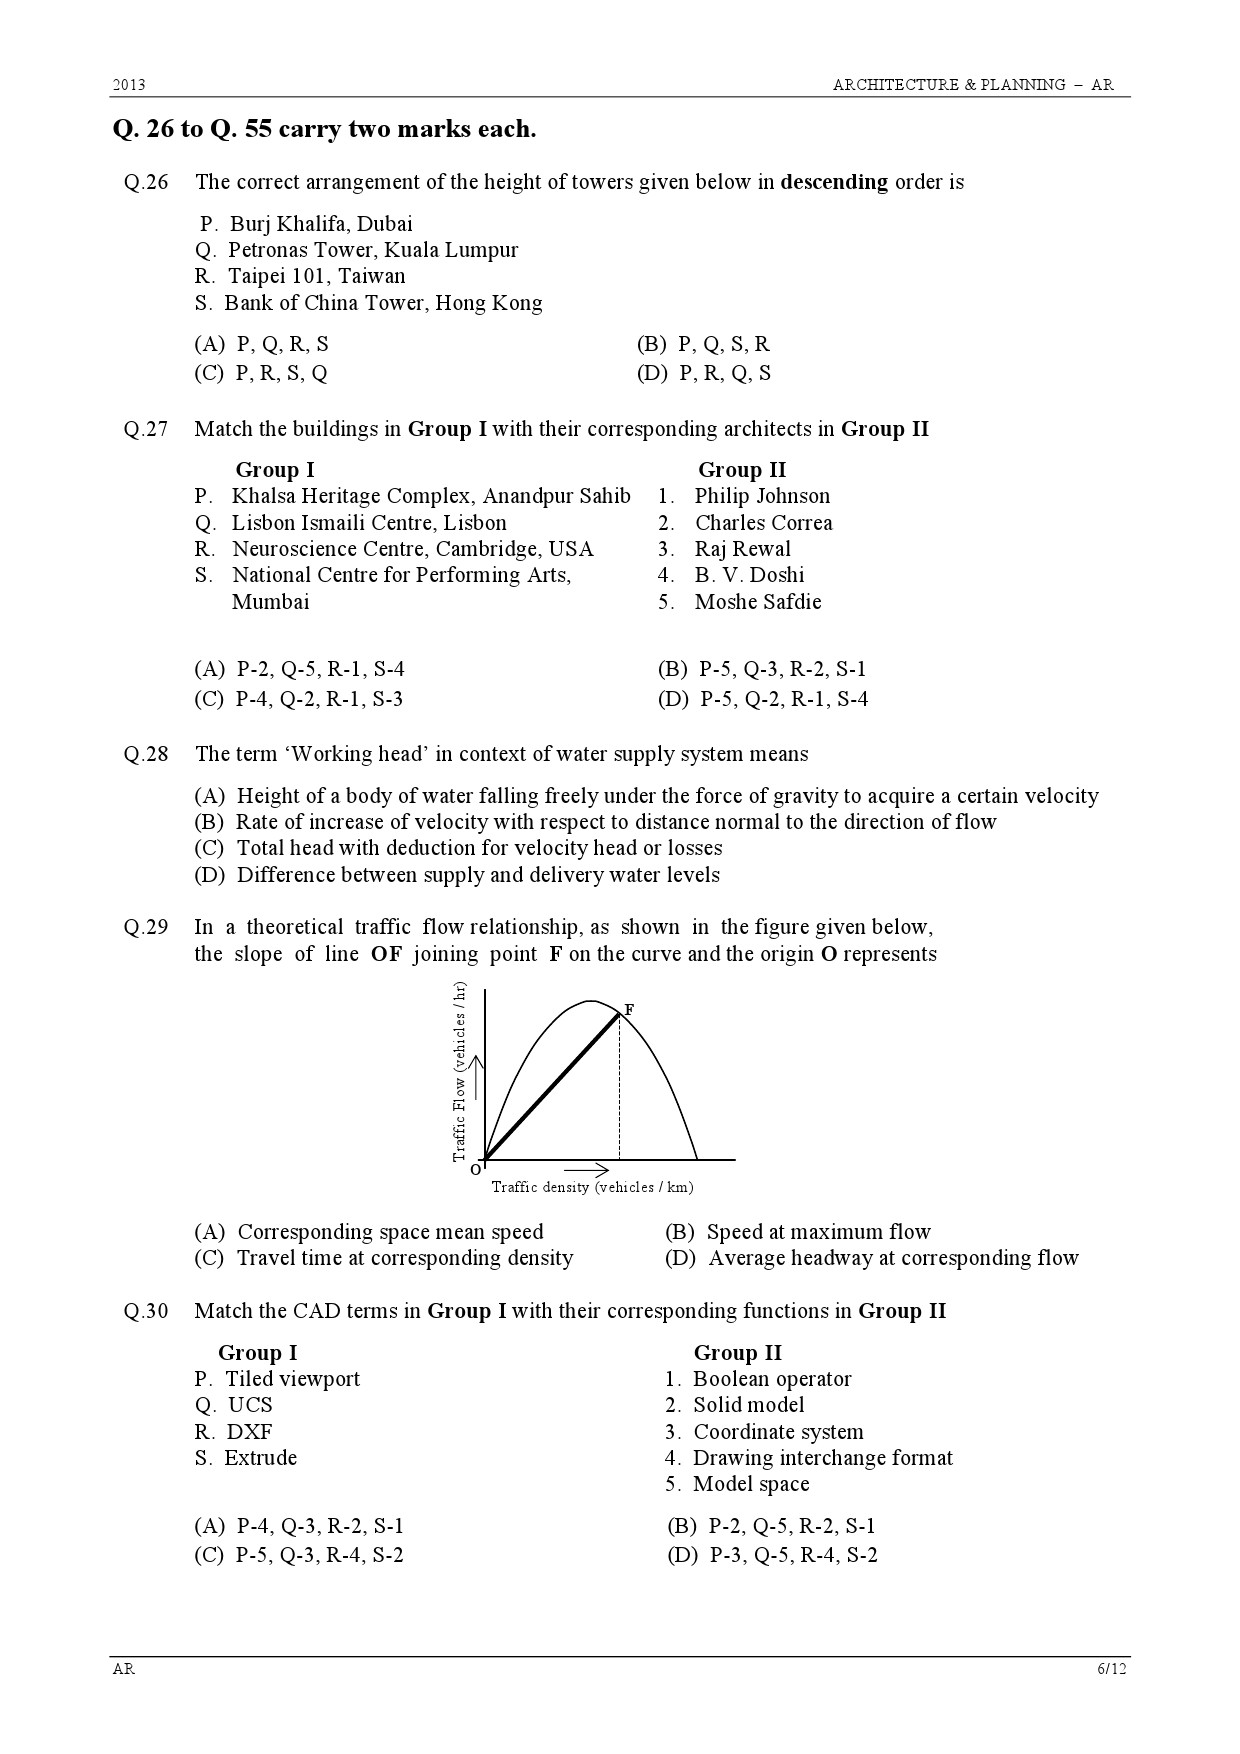 GATE Exam Question Paper 2013 Architecture and Planning 6